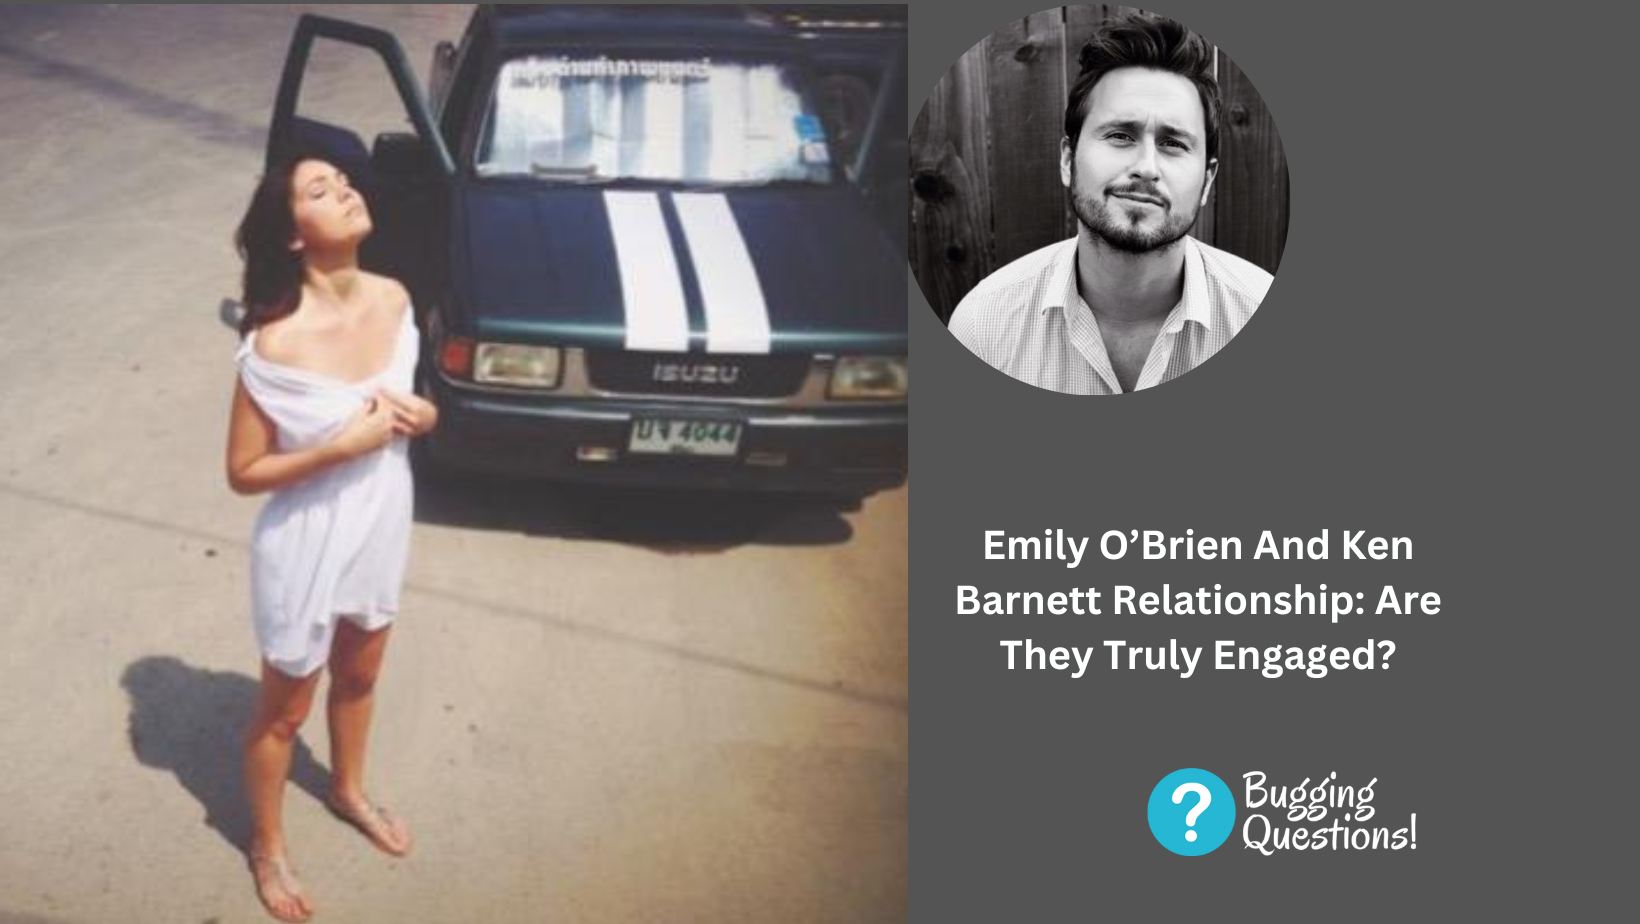 Emily O’Brien And Ken Barnett Relationship: Are They Truly Engaged?